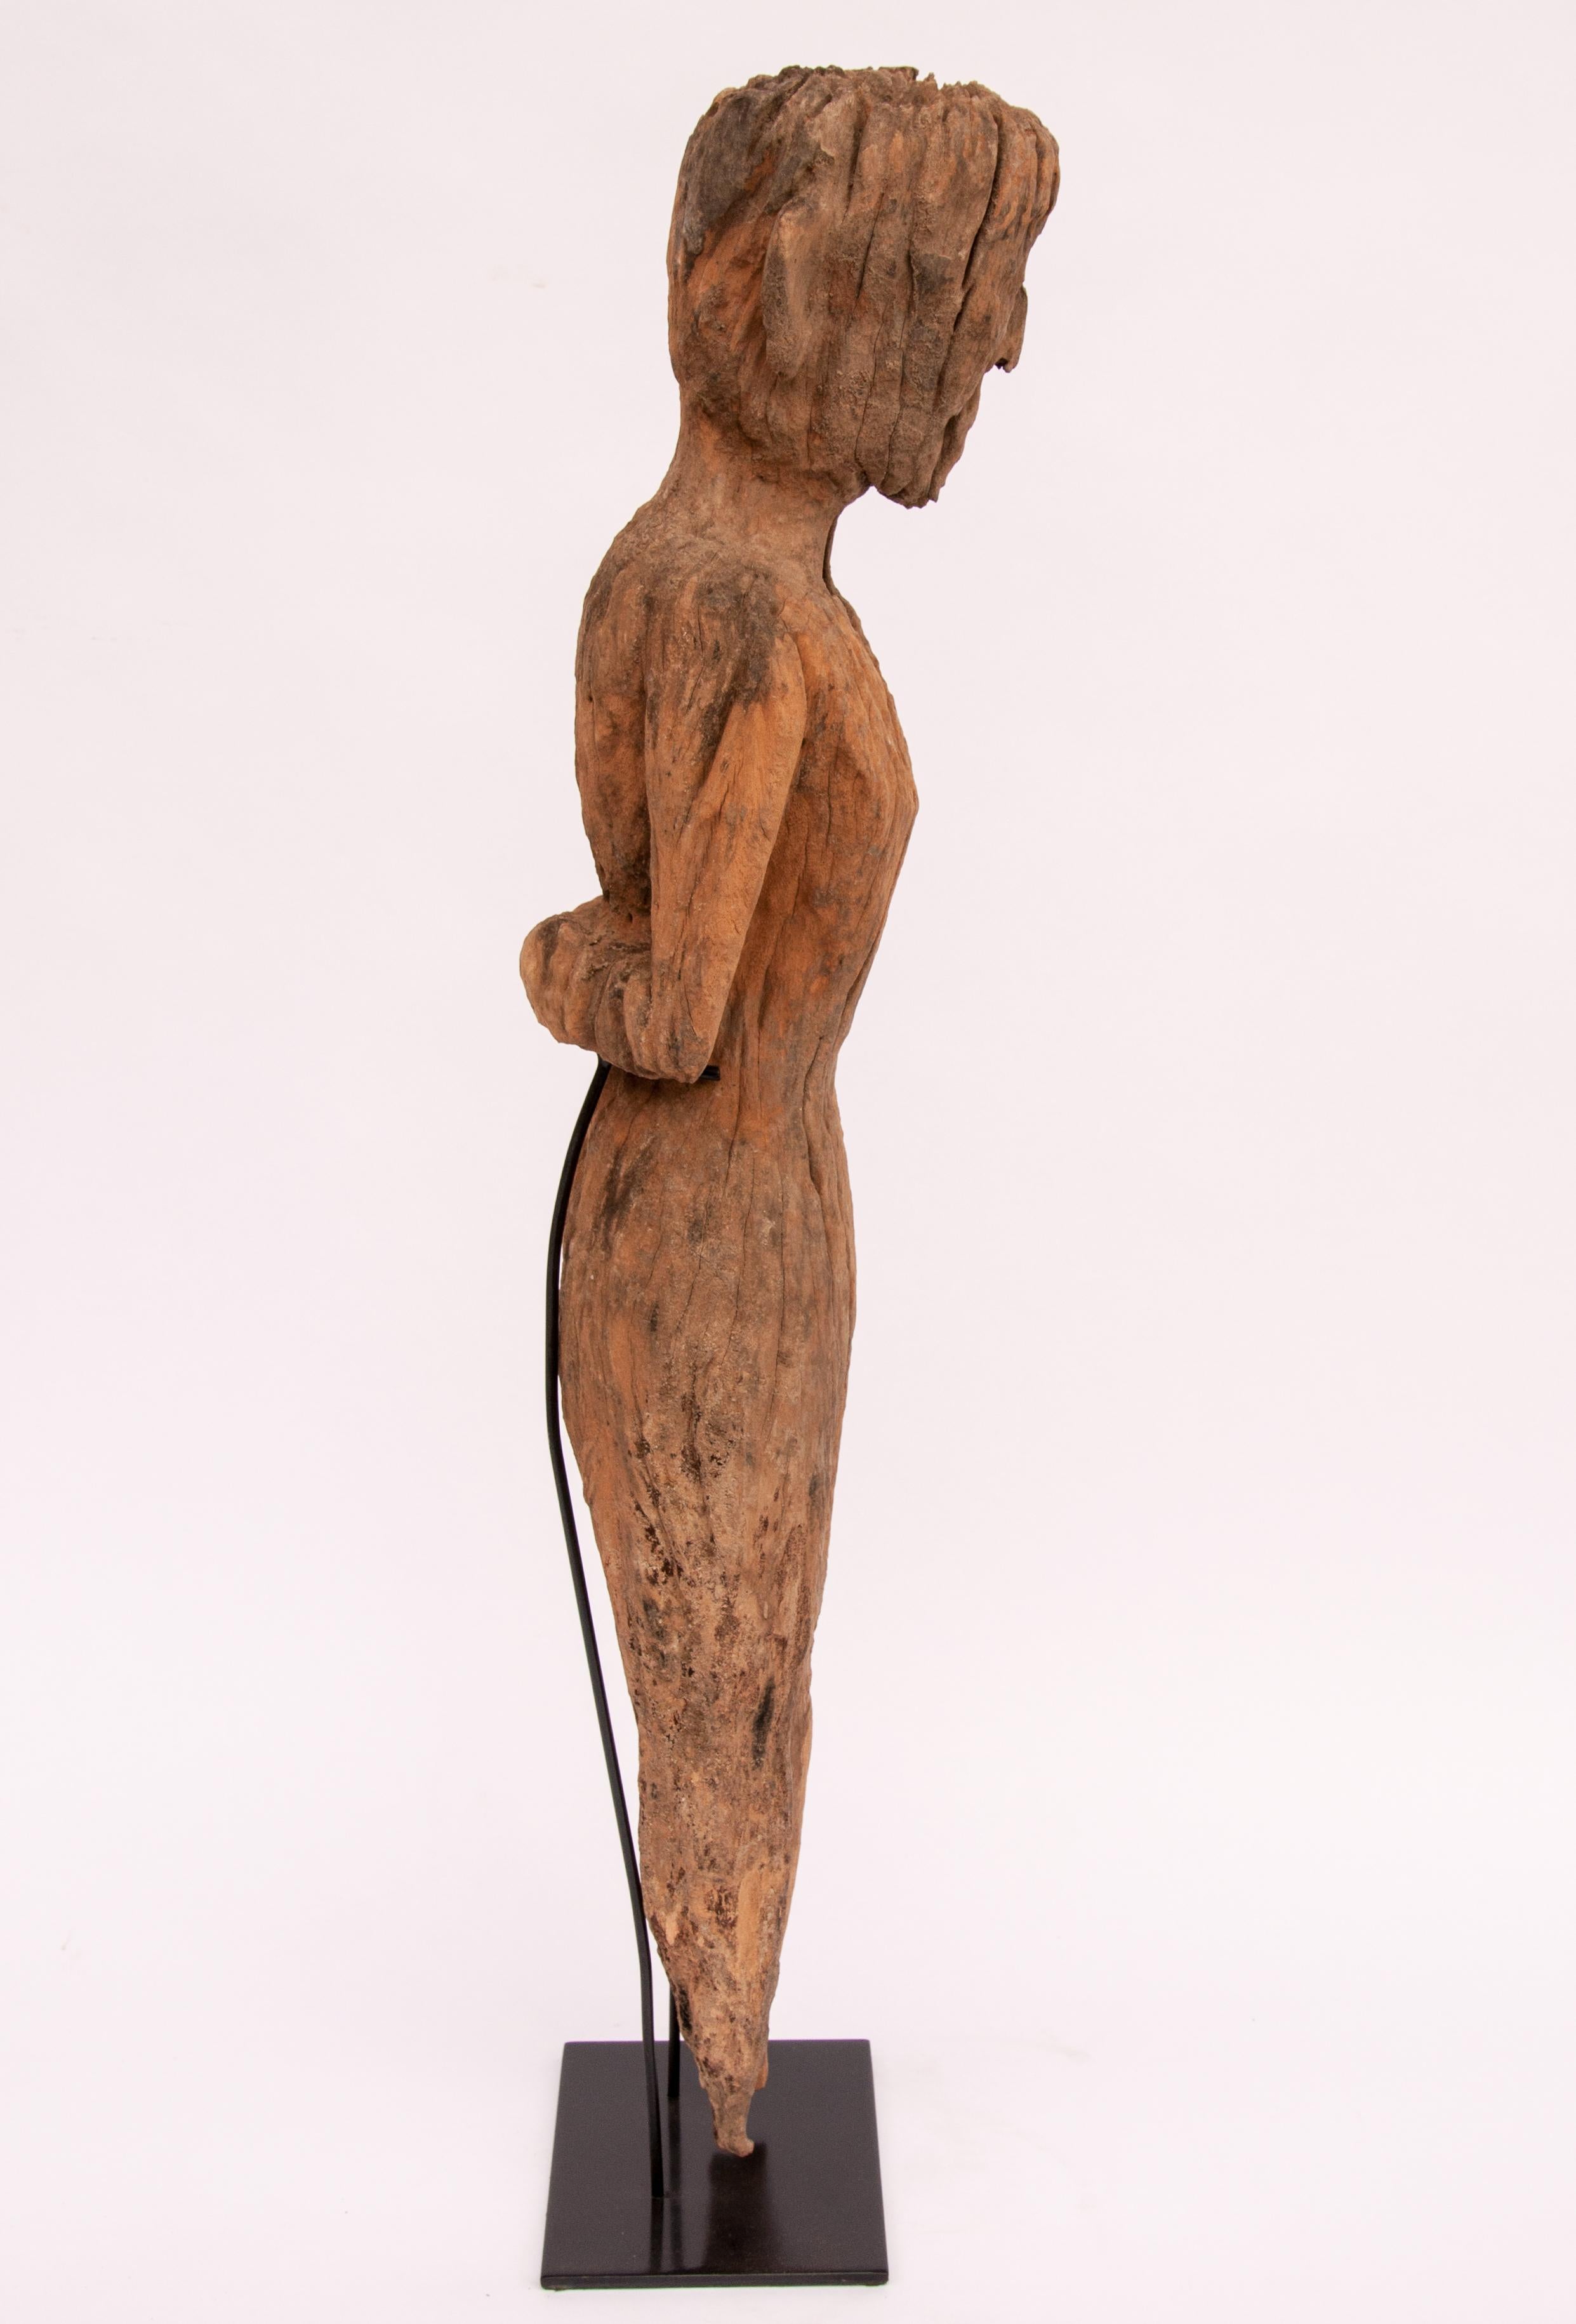 Hand-Carved Old Carved Wooden Figure, South or Southwest China, Early 20th Century, Mounted